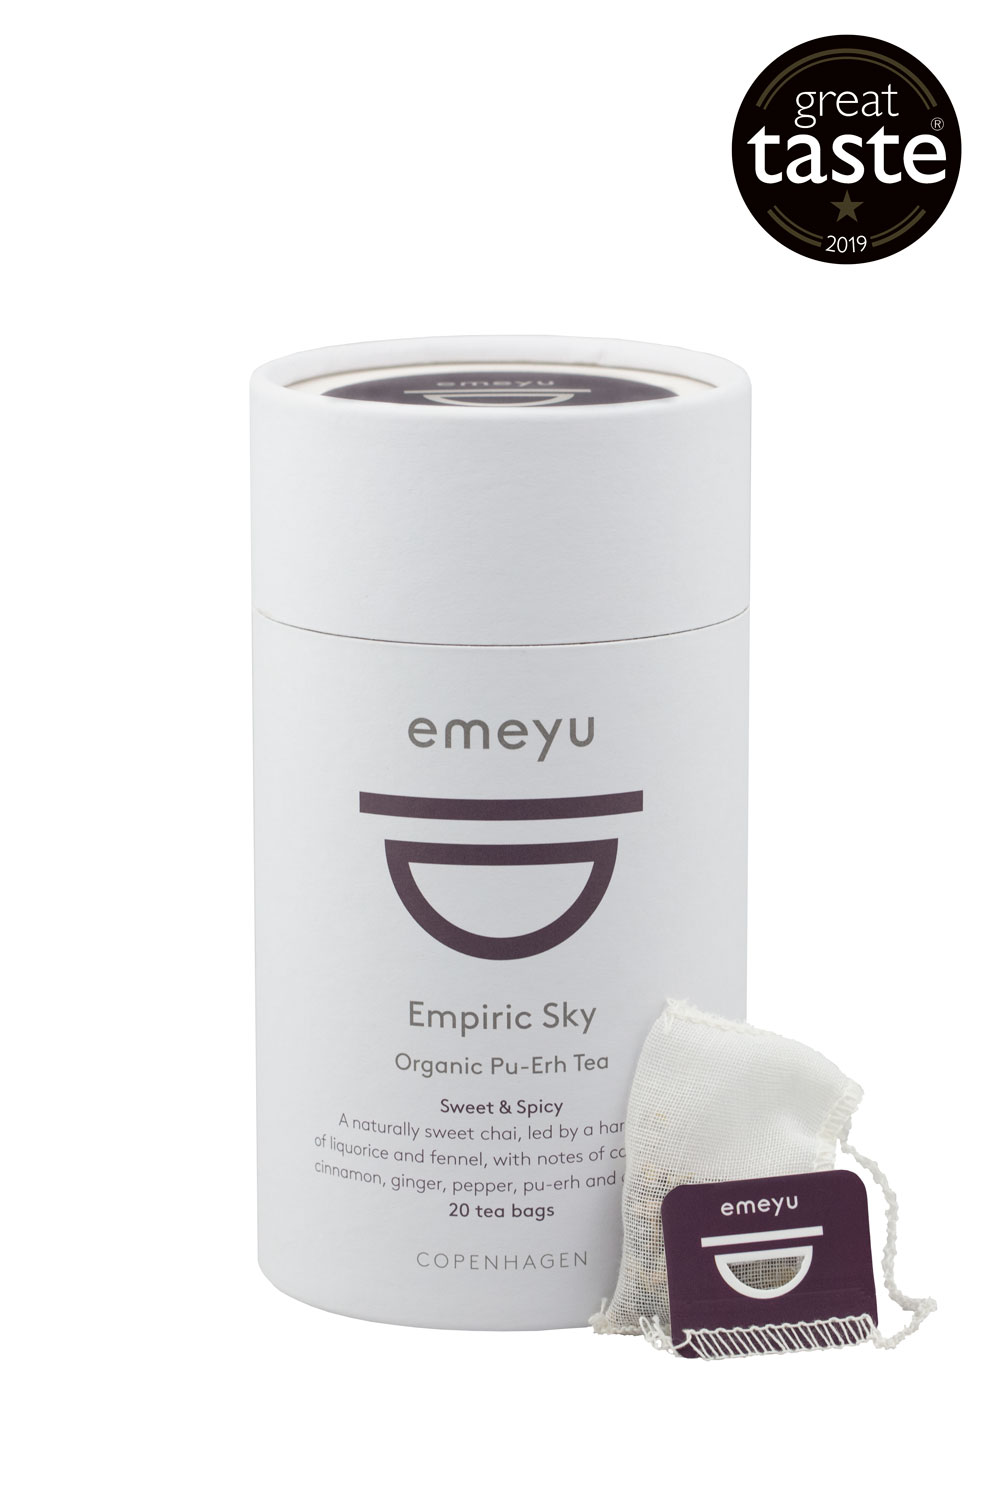 Empiric Sky organic Chai tea with spices and Puerh tea in 20 cotton teabags microplastfree and GMO-free in sustainable packaging